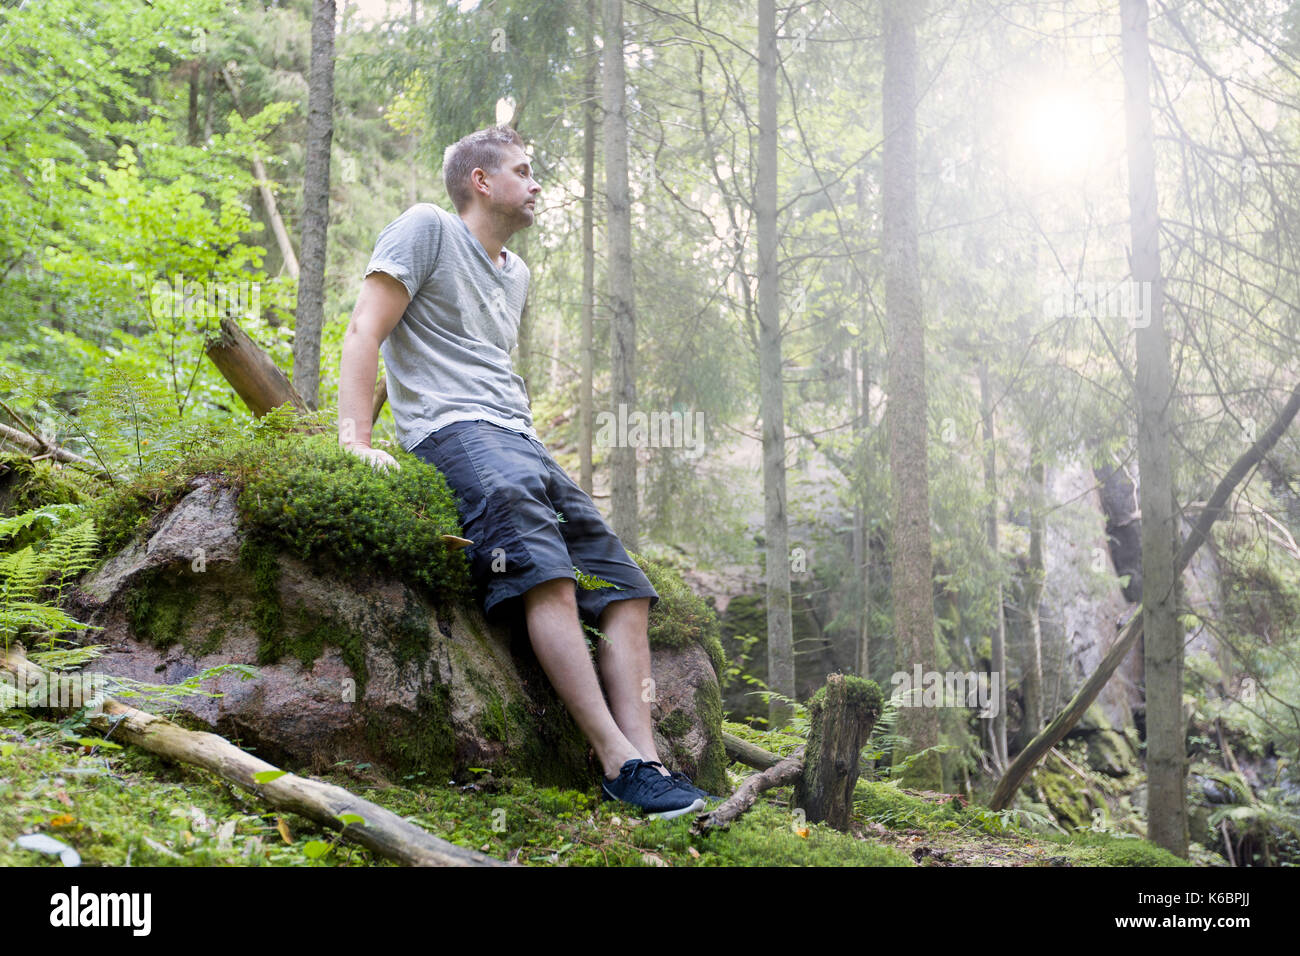 Mid adult caucasian man outdoors in tranquil forest relaxing on rock  Model Release: Yes.  Property Release: No. Stock Photo